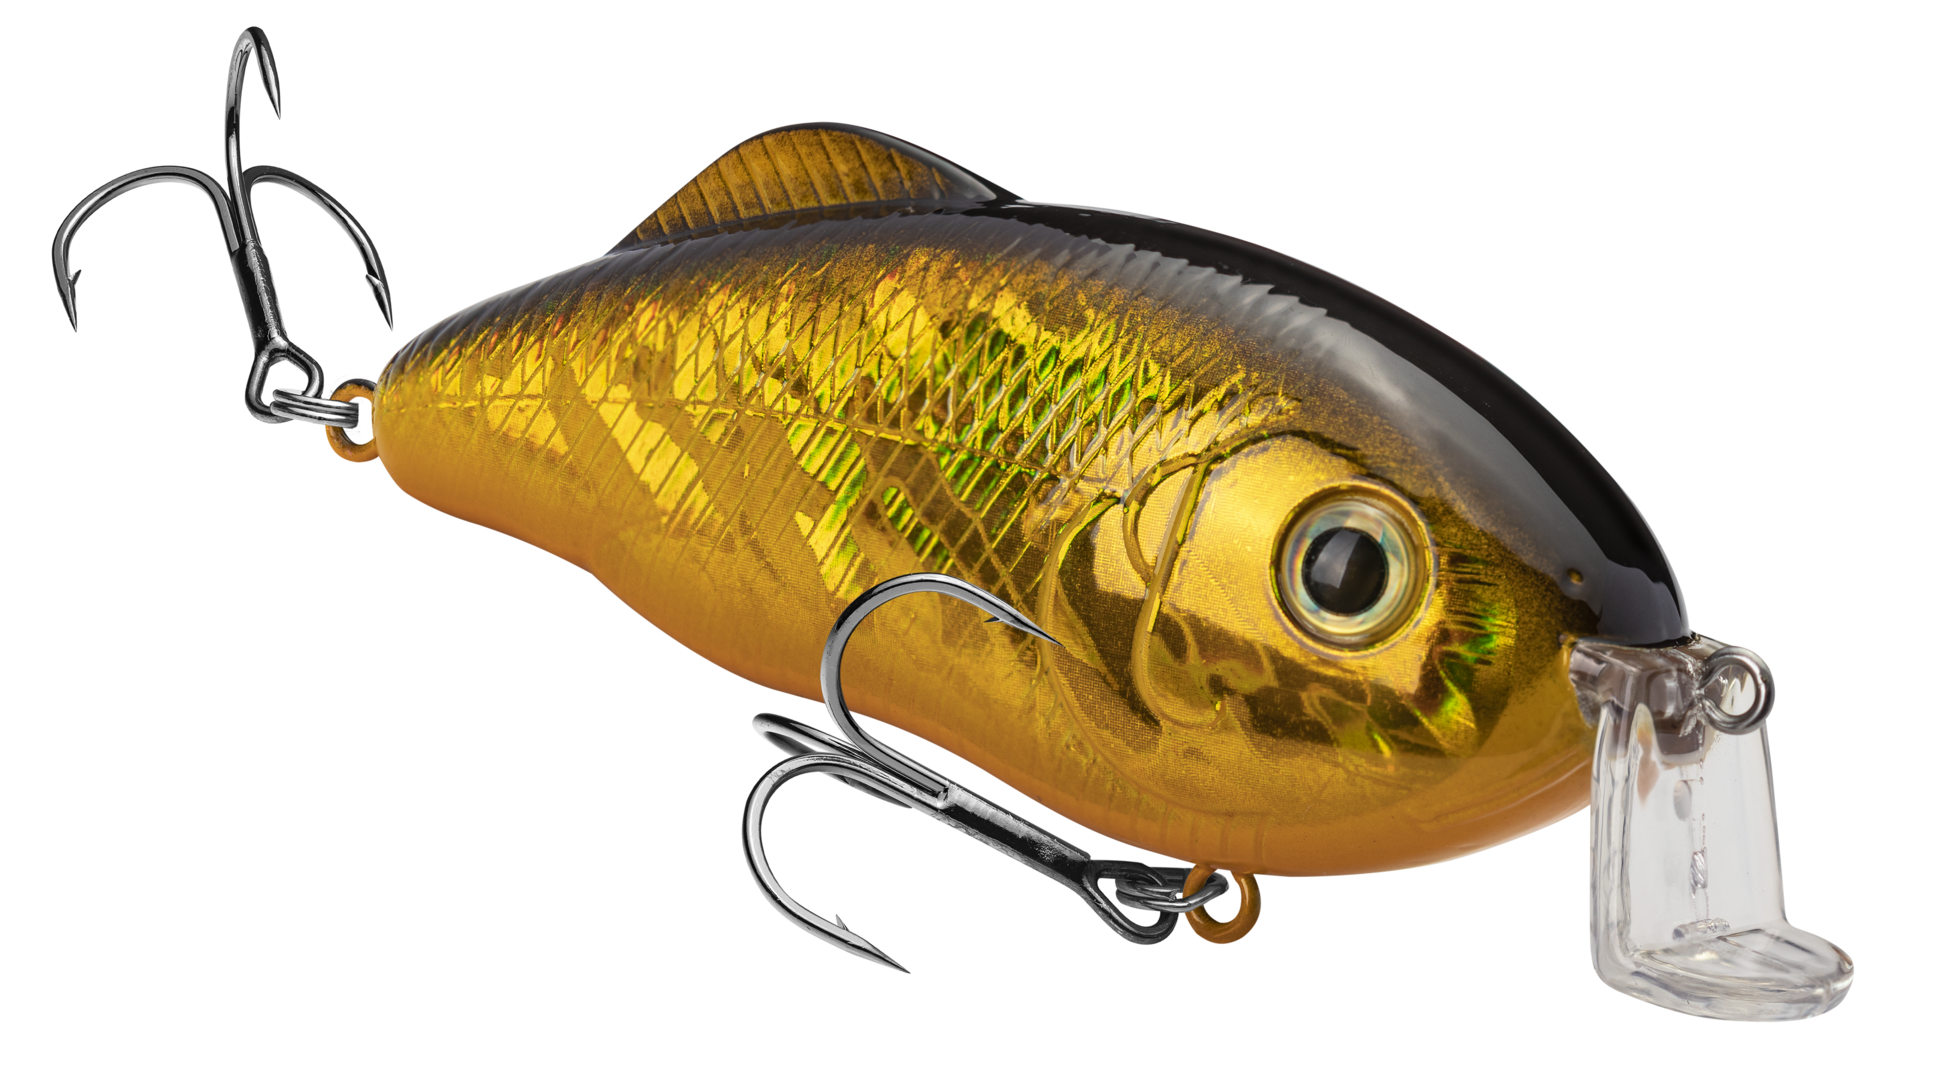 Best Baits for trout fishing. Share your experience. : r